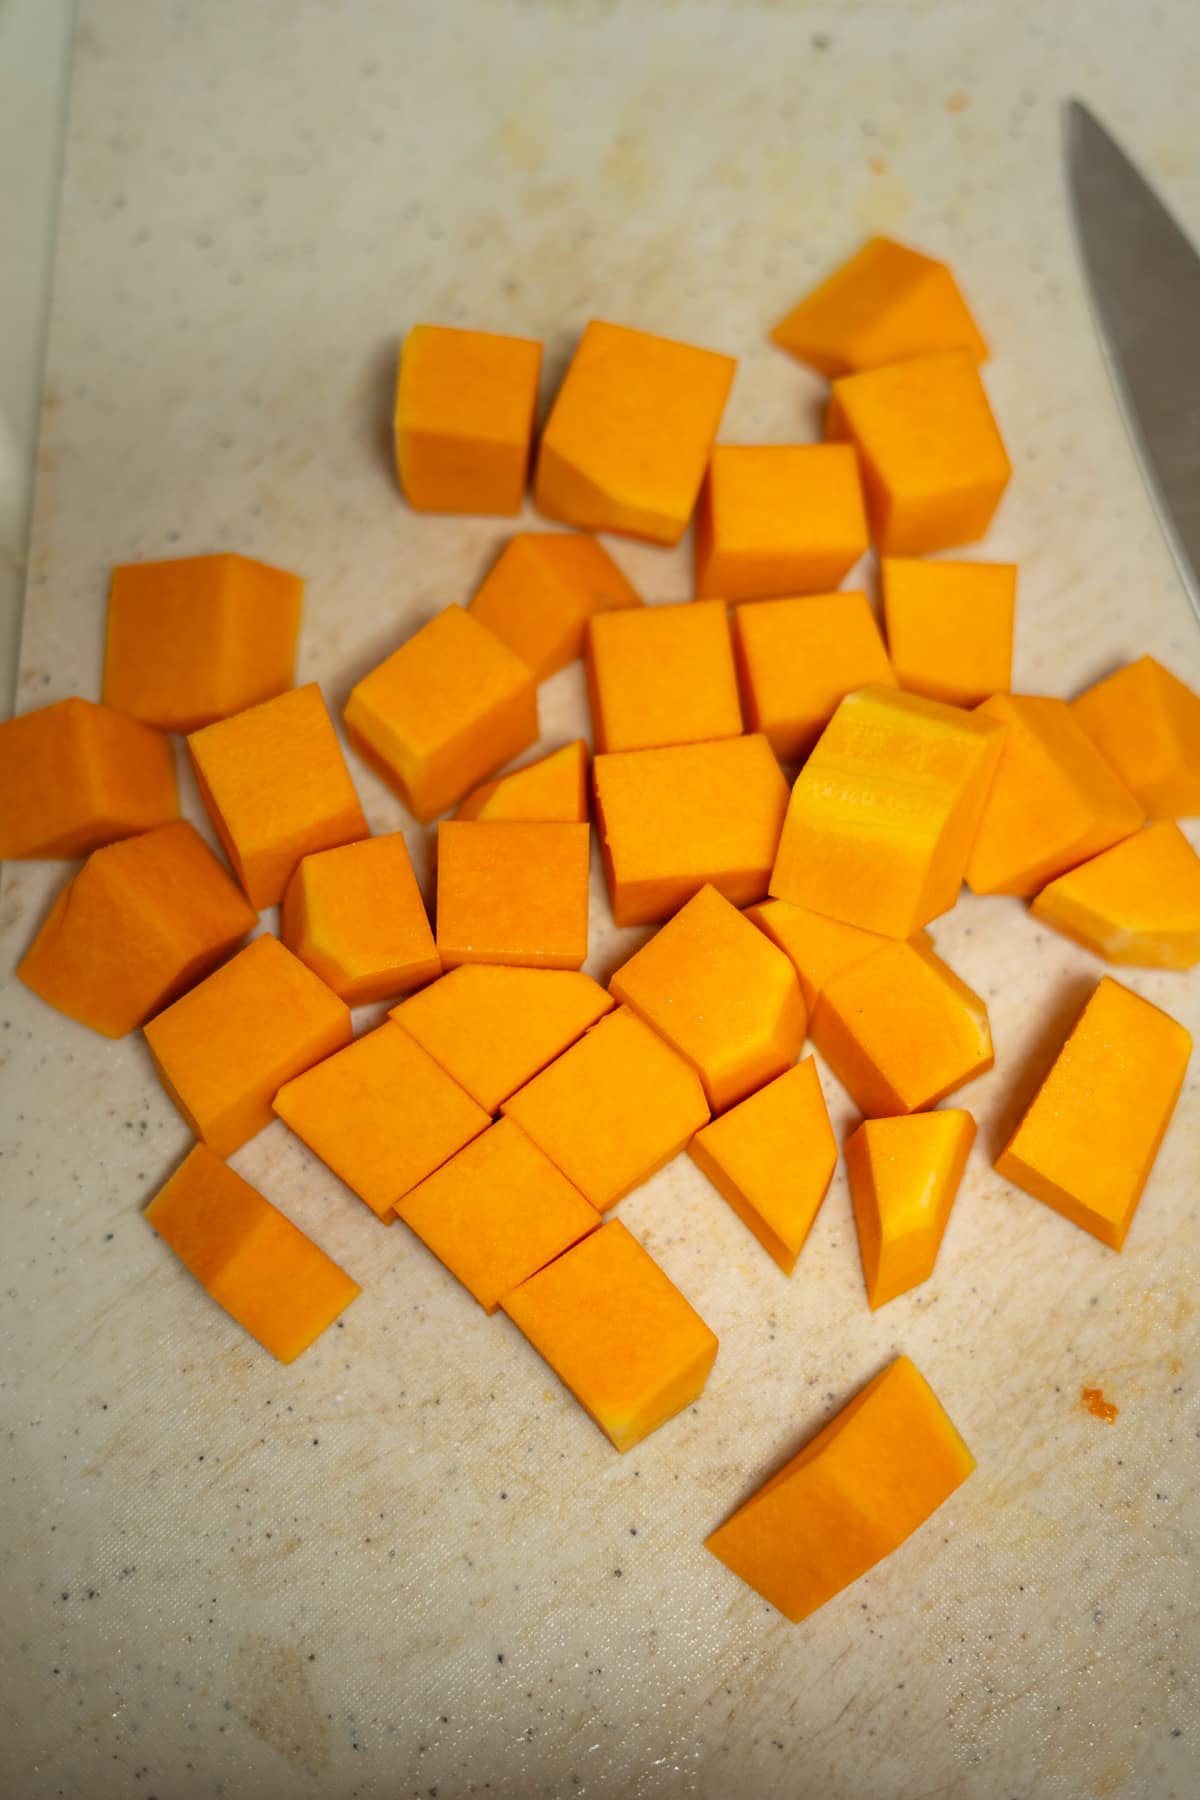 A knife on a cutting board next to a pile of orange cubes.